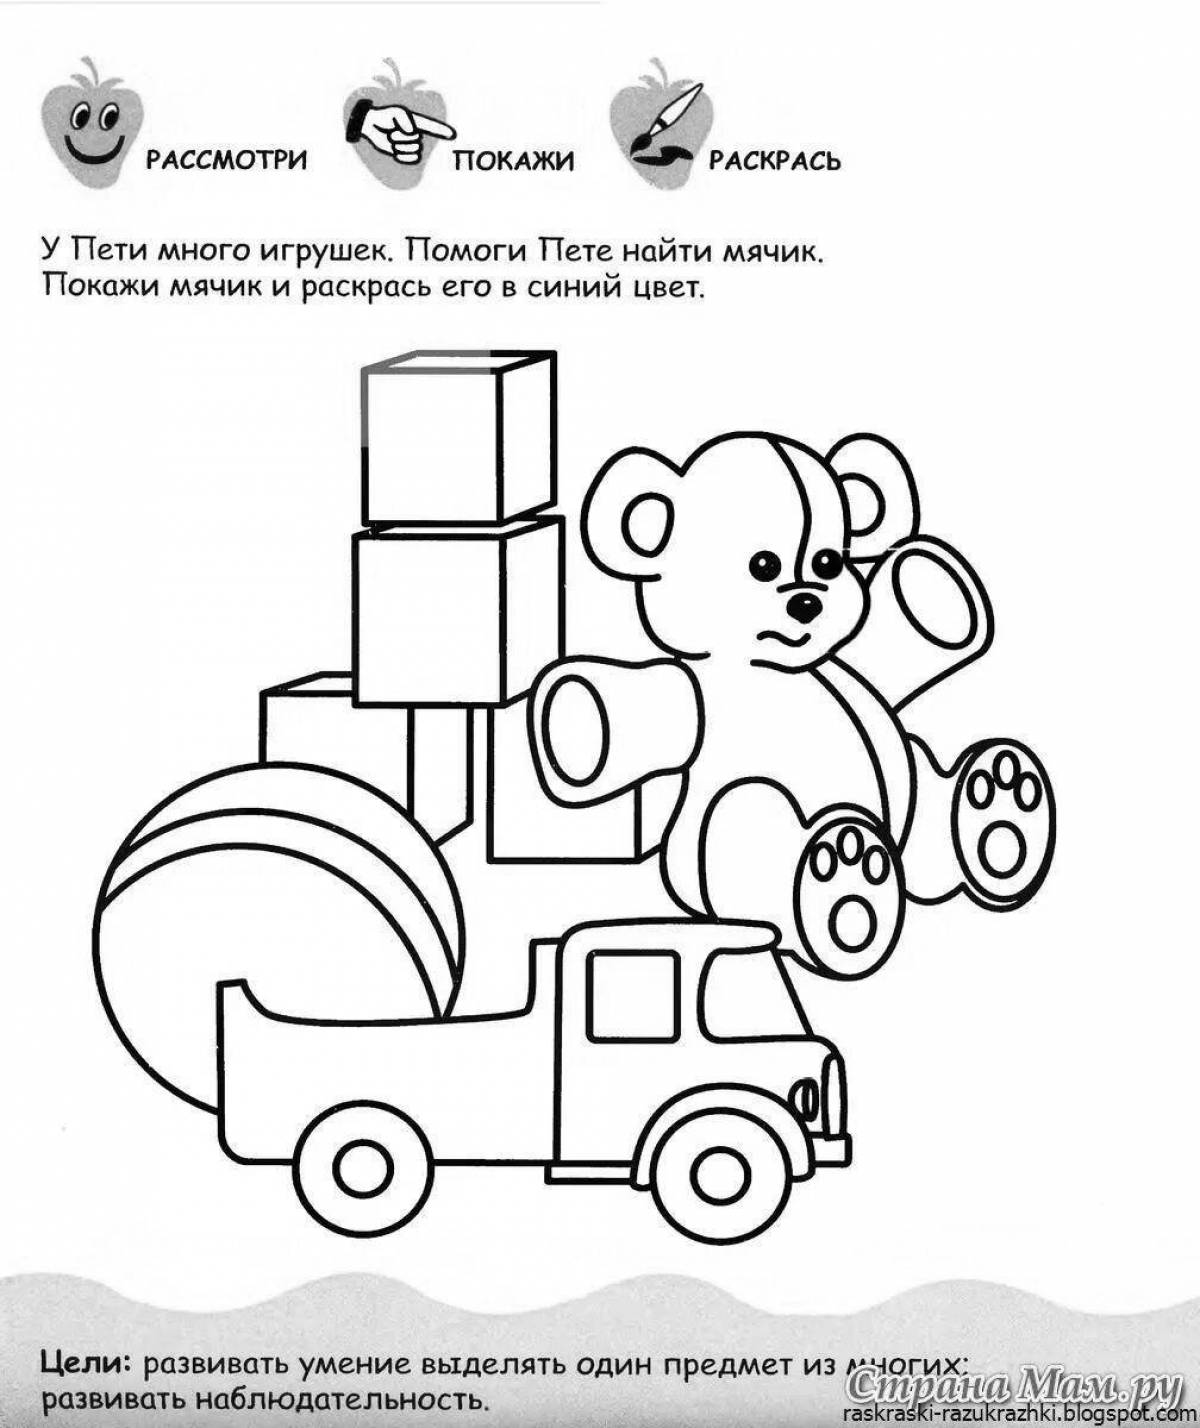 Fun coloring book for smart kids 3-4 years old